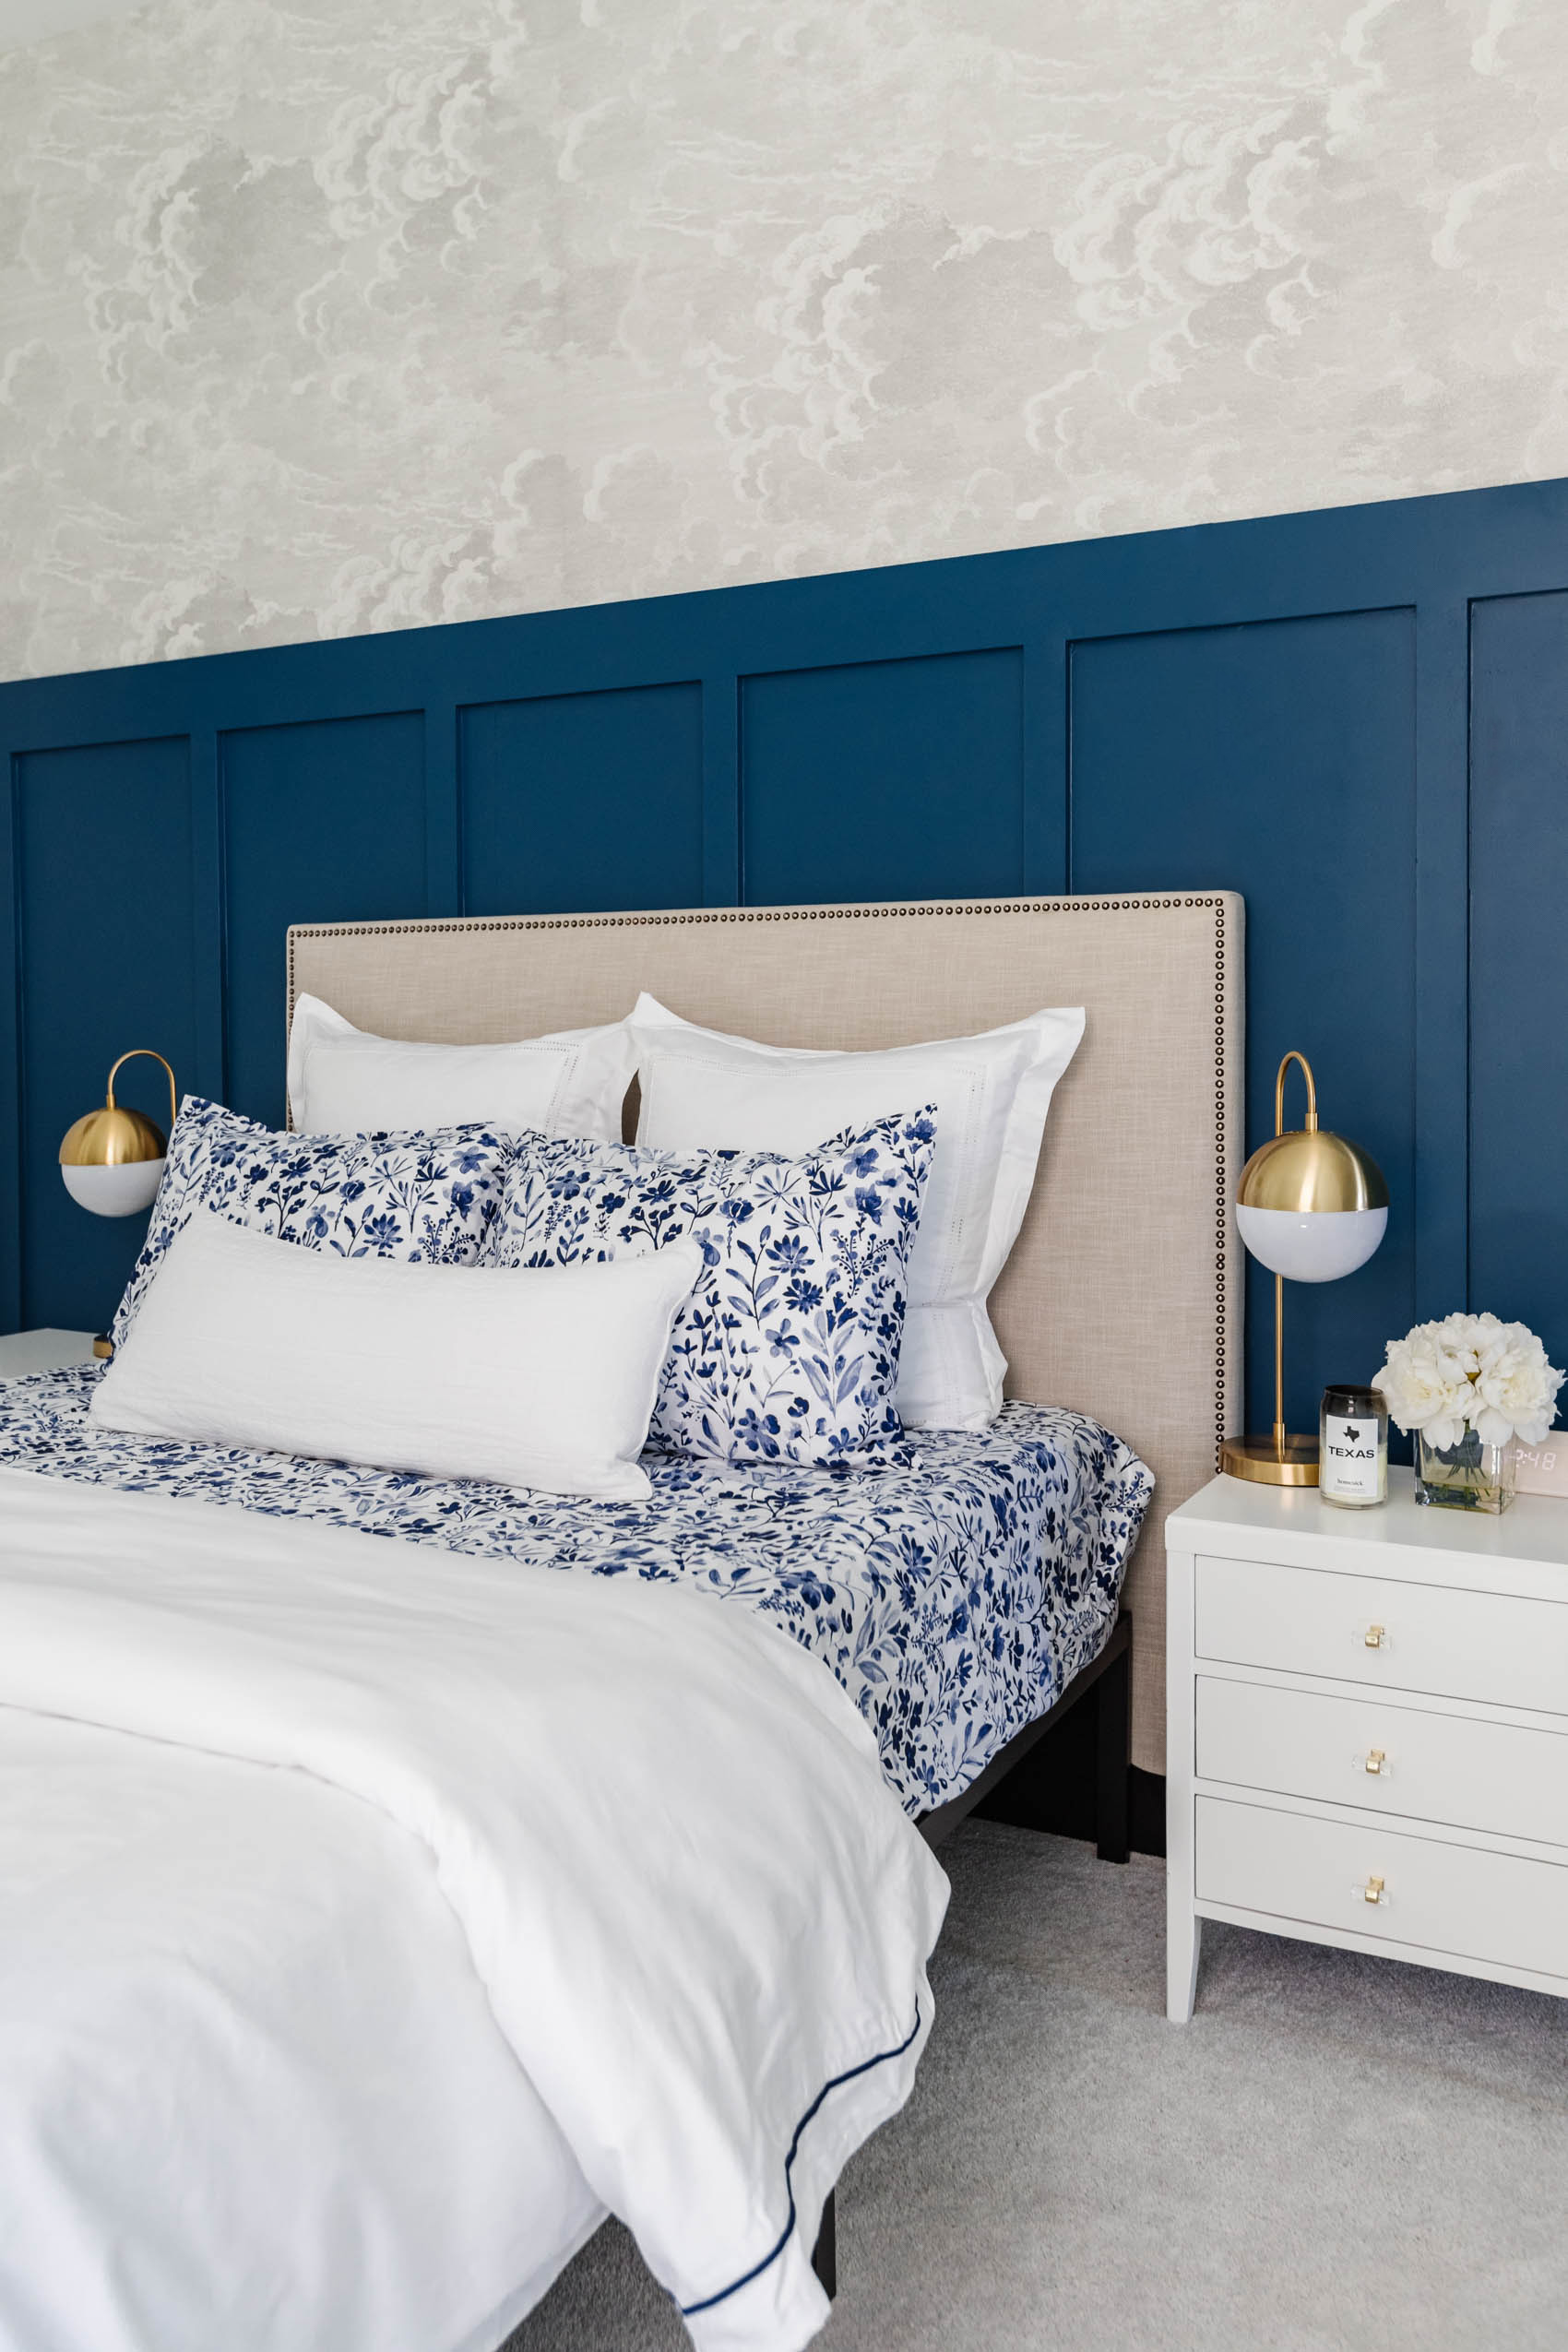 Guest room ideas with board and batten in PPG Chinese Porcelain with Cole & Son nuvolette wallpaper, west elm upholstered headboard, boll & branch botanical print bedsheets, white nightstands and brass table lamps